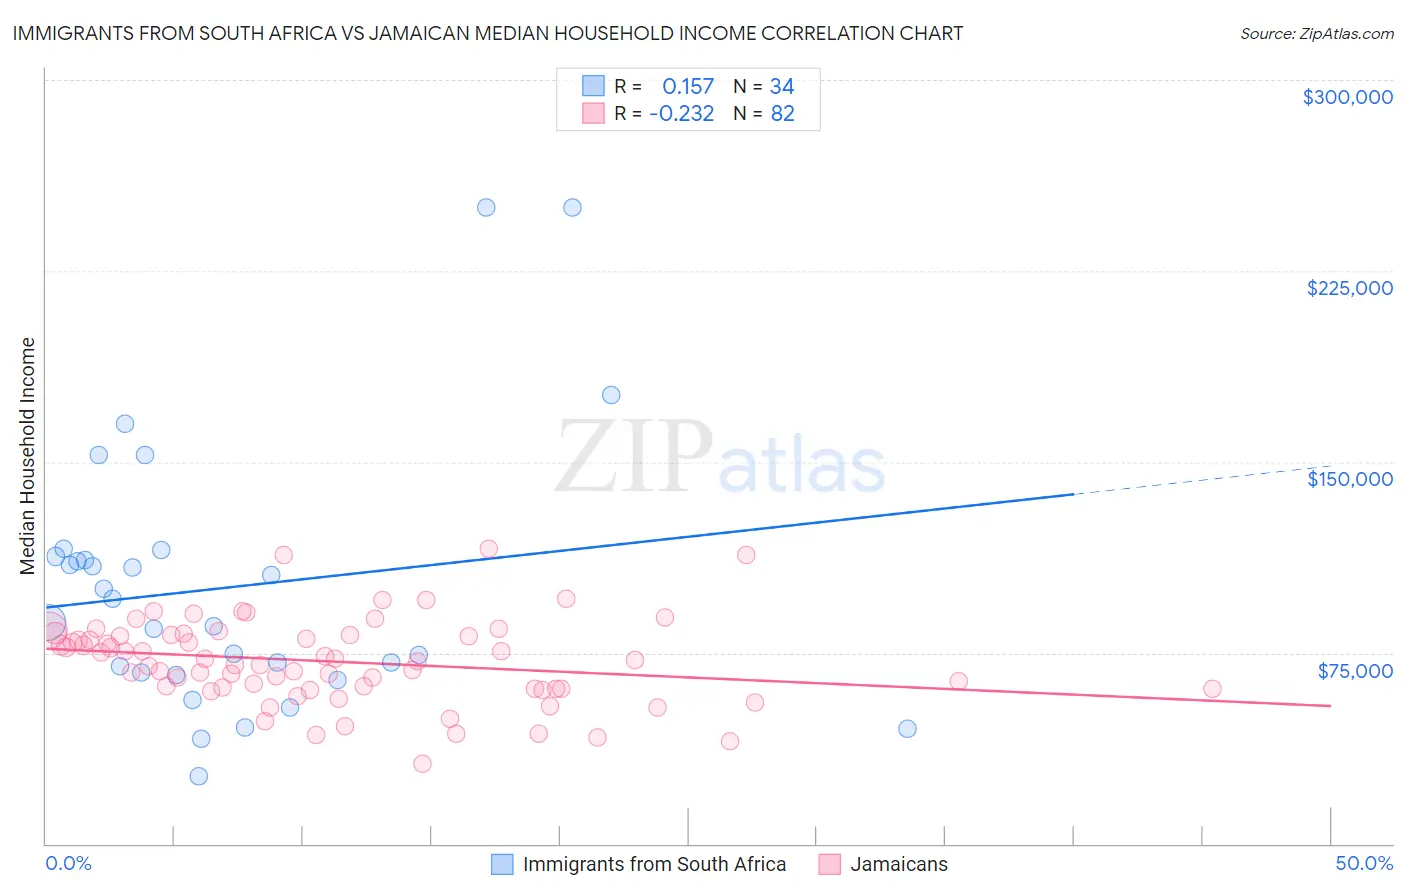 Immigrants from South Africa vs Jamaican Median Household Income